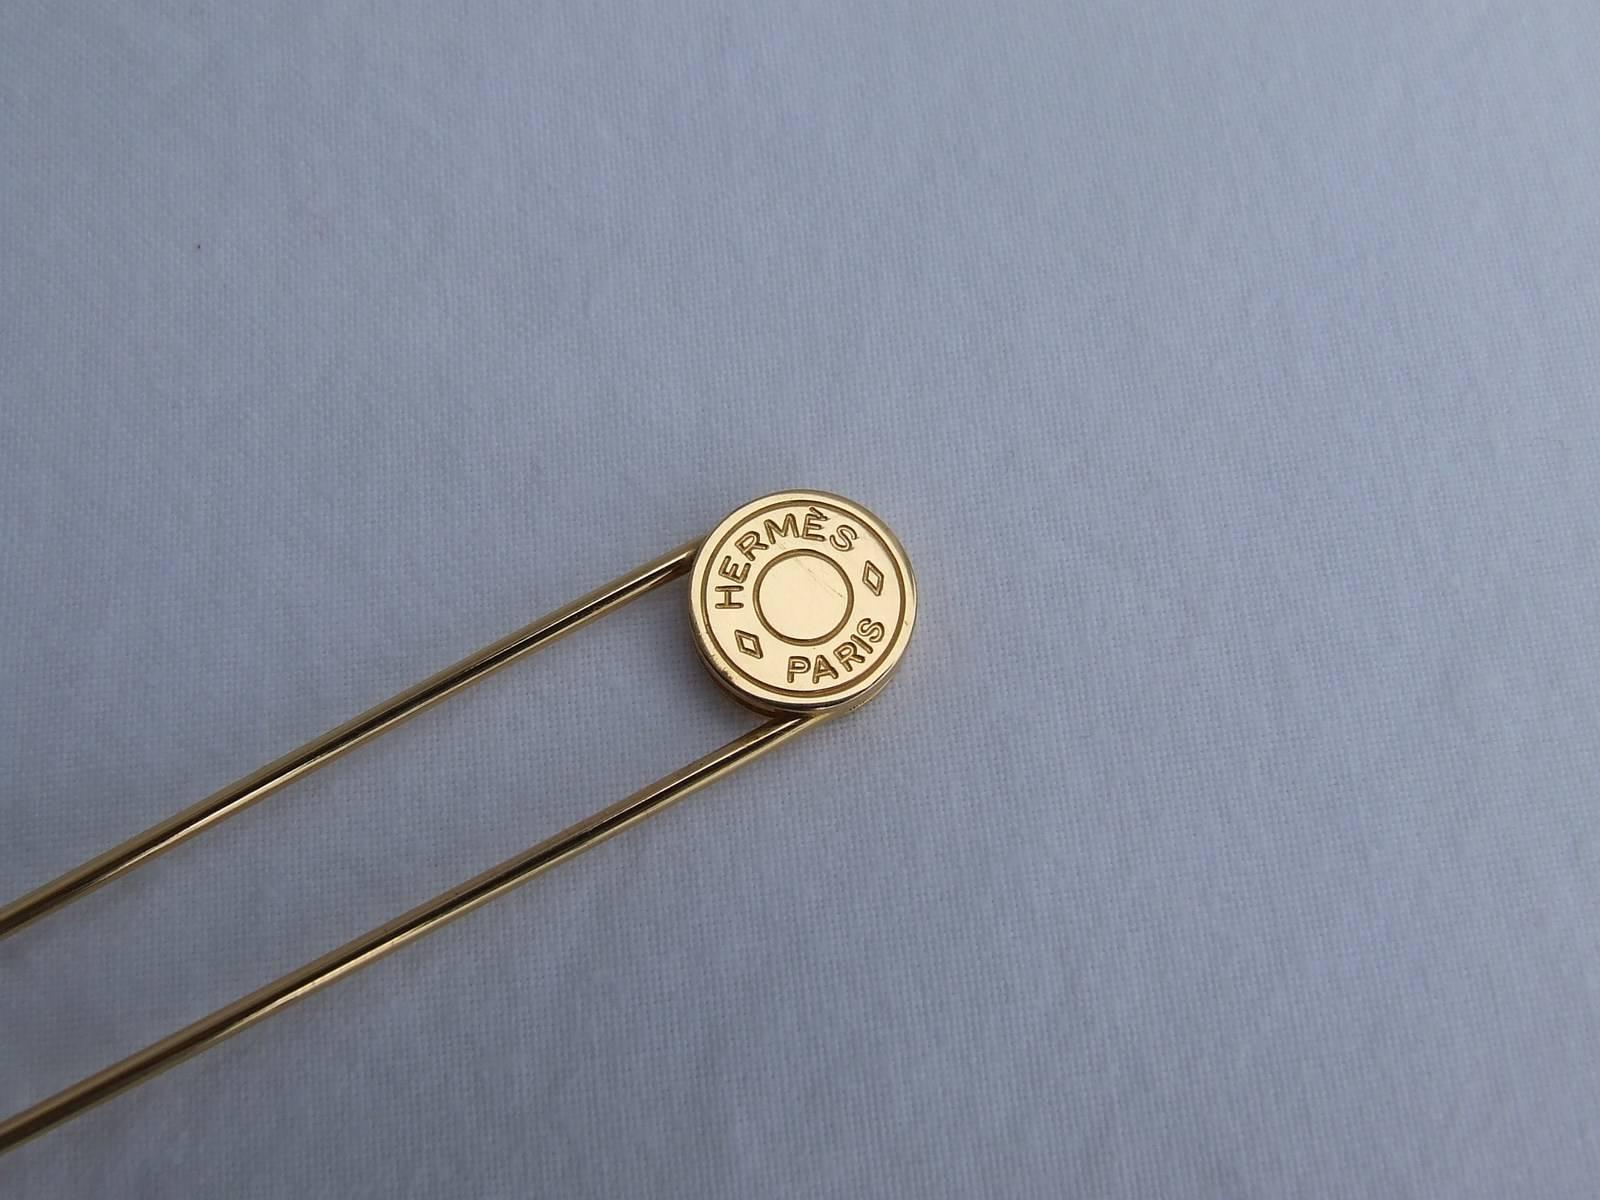 Beautiful Authentic Hermes Pin

Made of Golden metal

